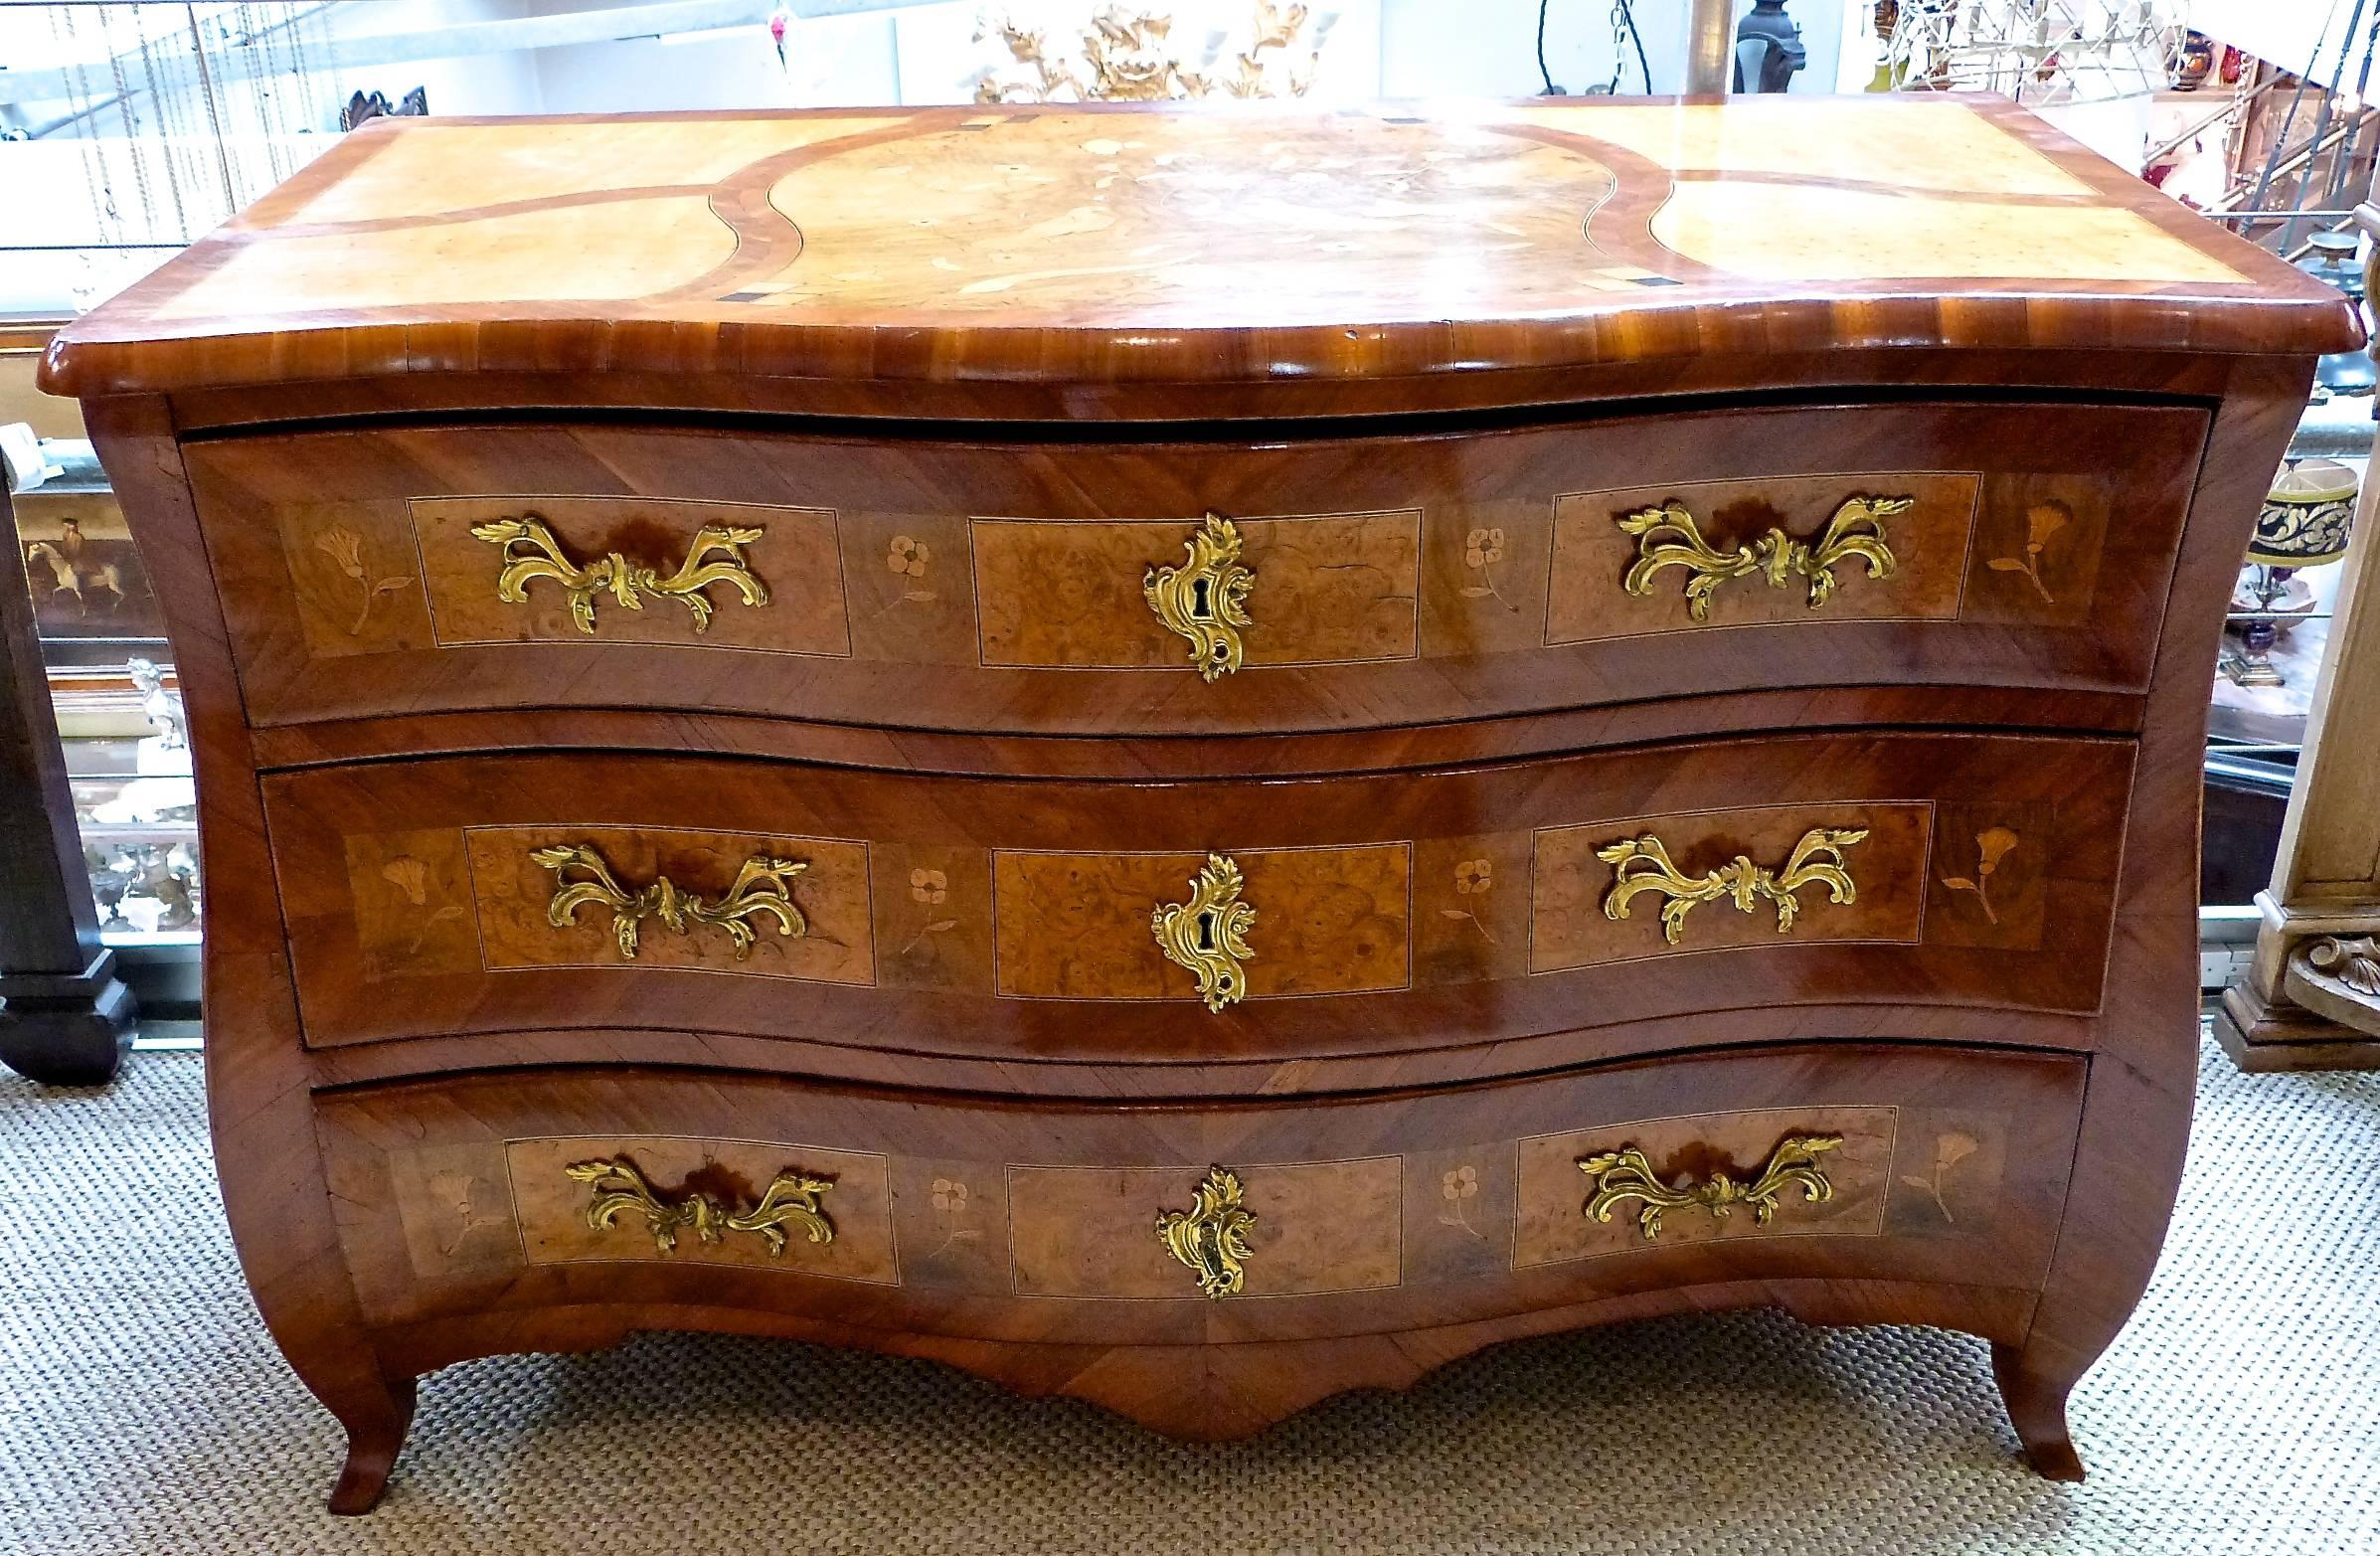 A late 18th century three-drawer bombe commode with gilt metal handles, the top with a panel depicting birds.